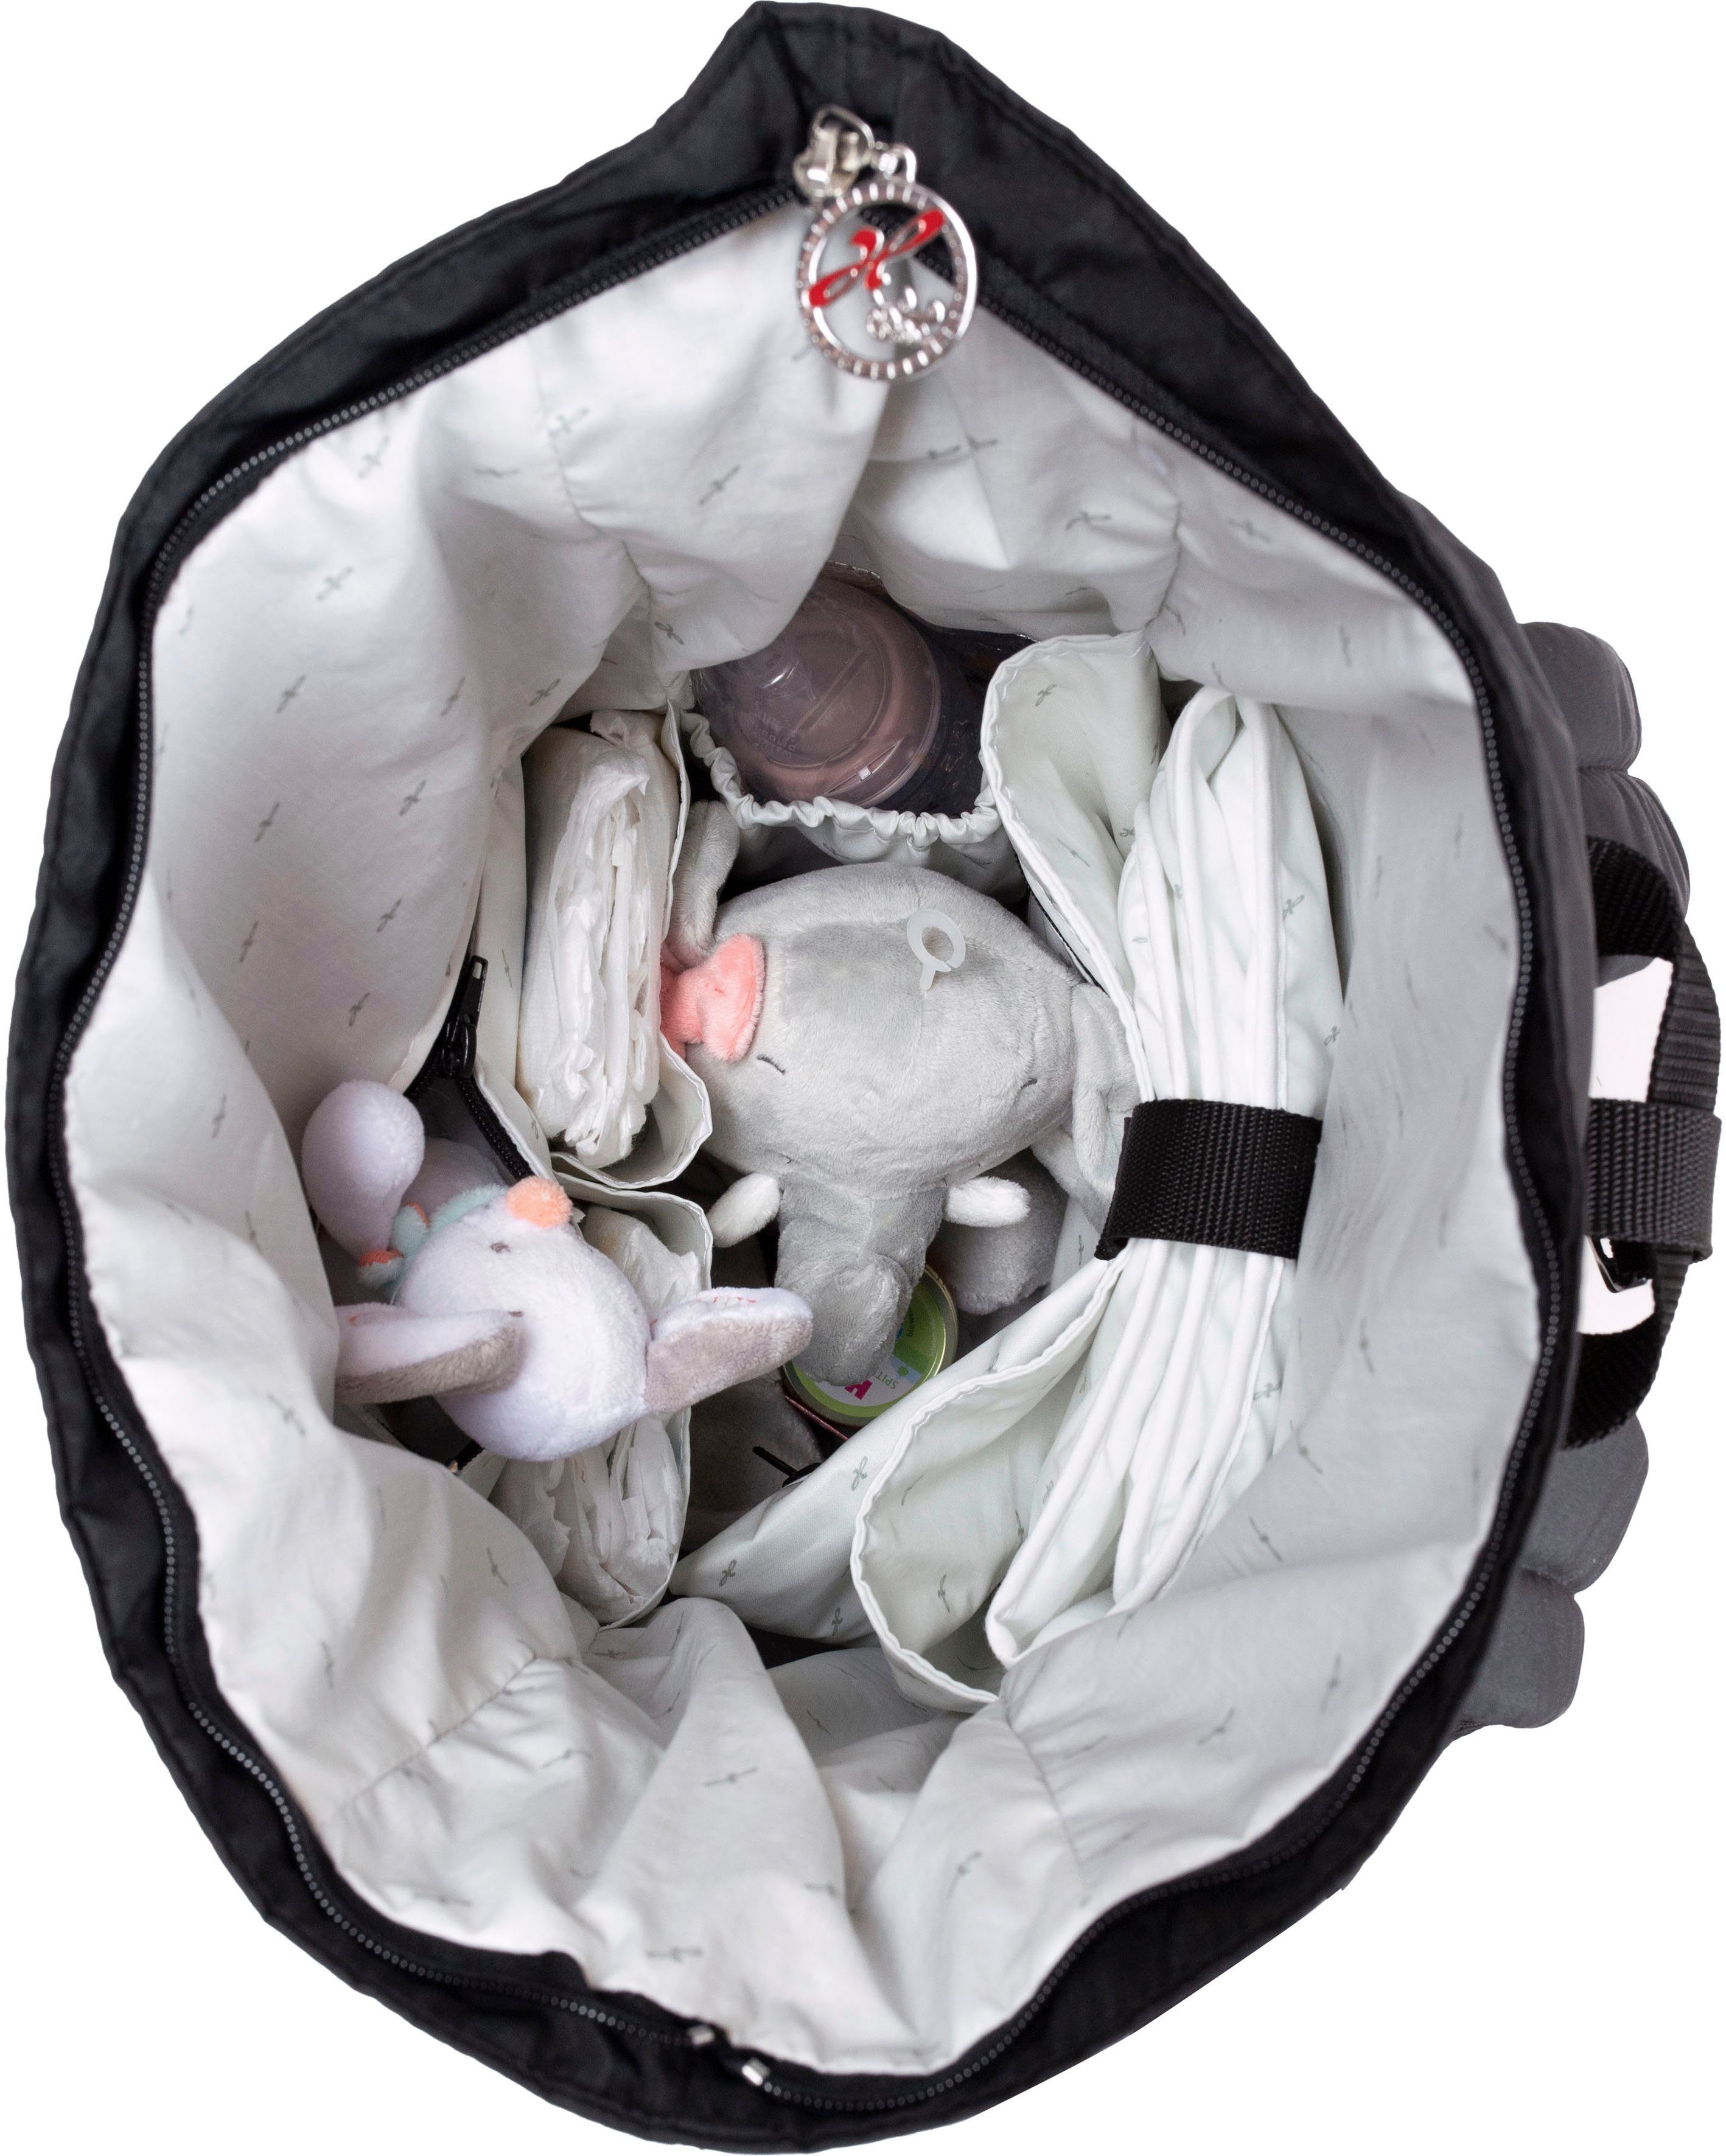 Hartan Wickelrucksack Space bag - Made birds Thermofach; mit Collection, in Casual rosy Germany